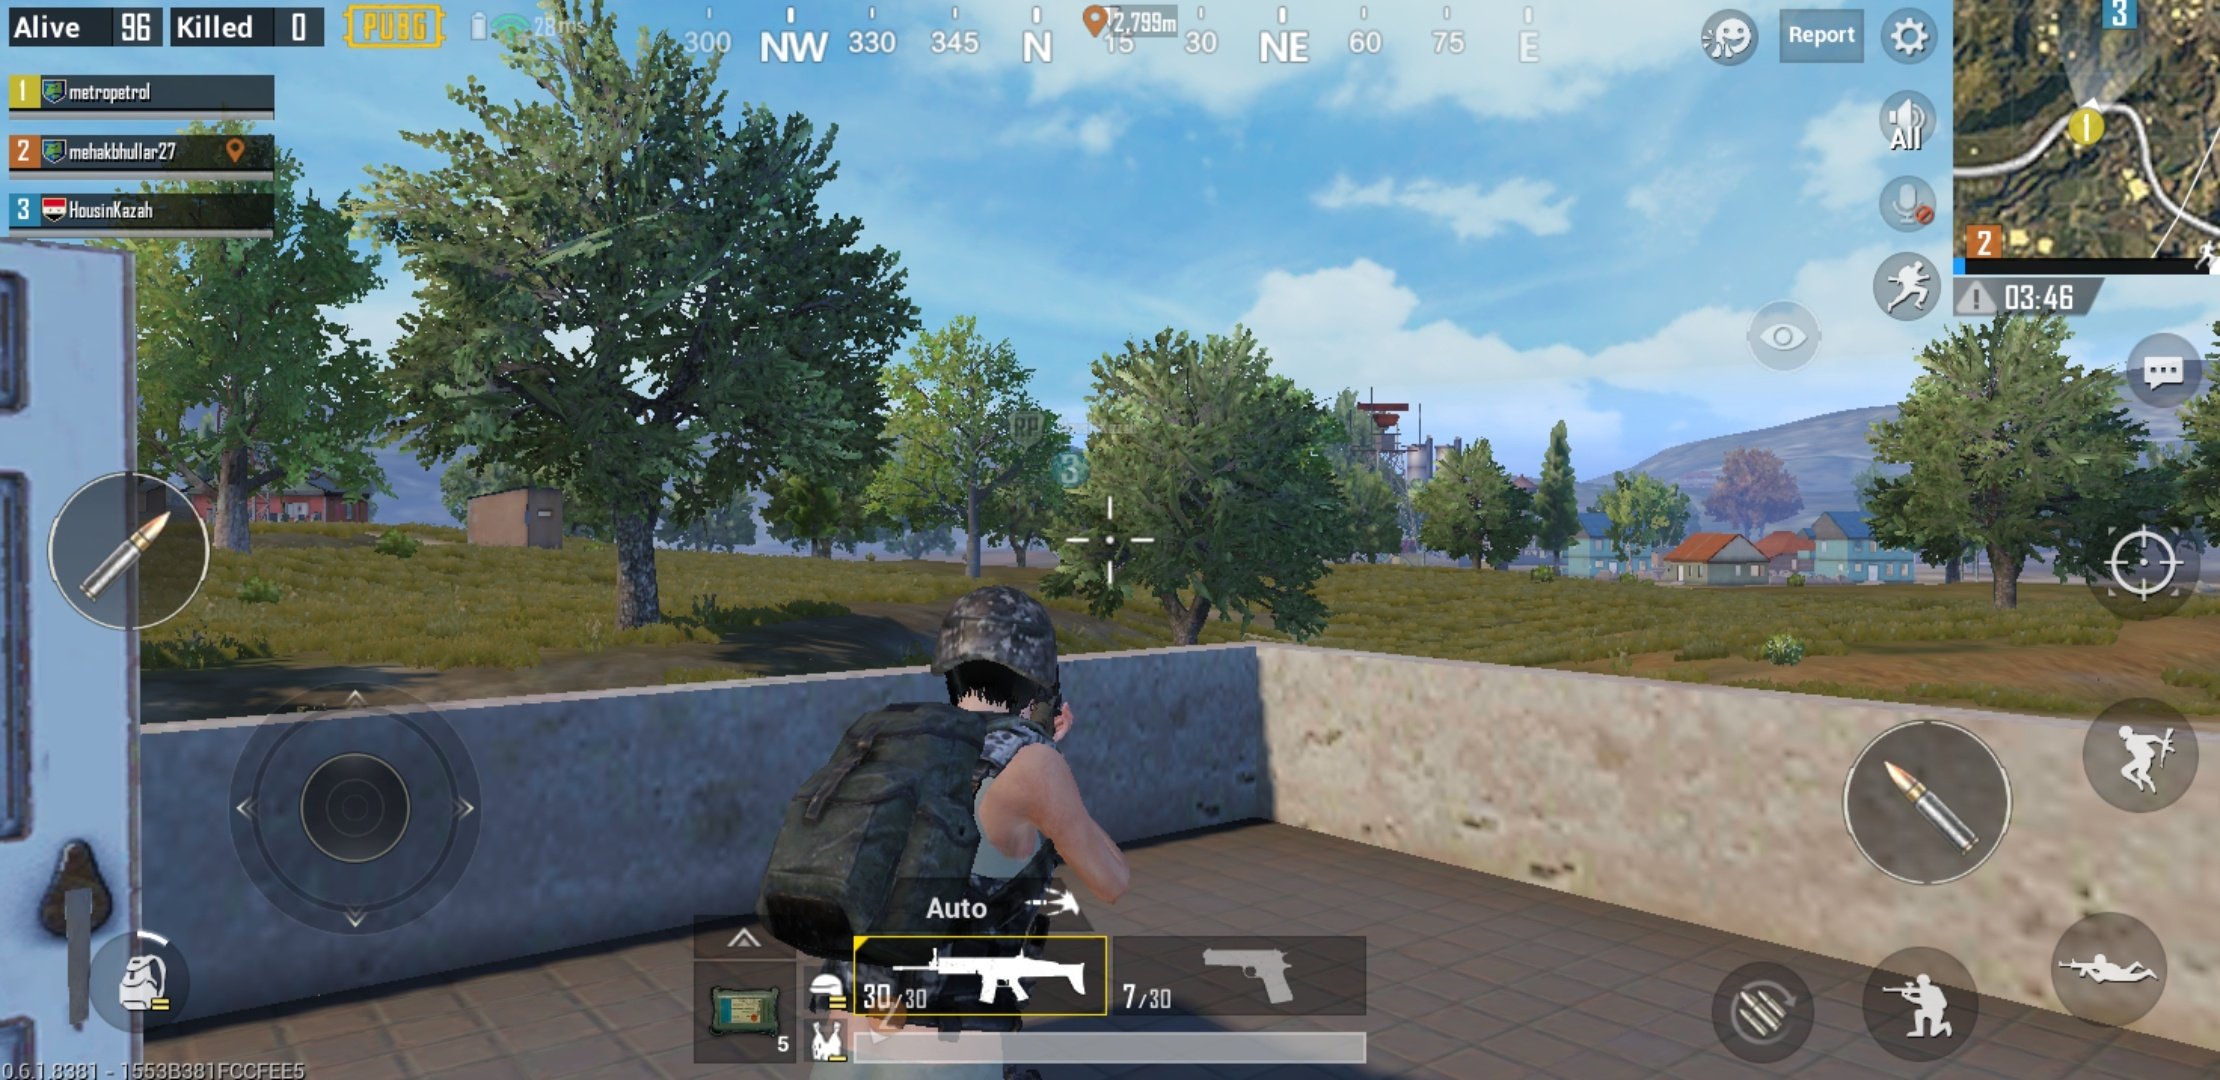 iPhone X owners get shaky frame rates and low brightness with PUBG Mobile